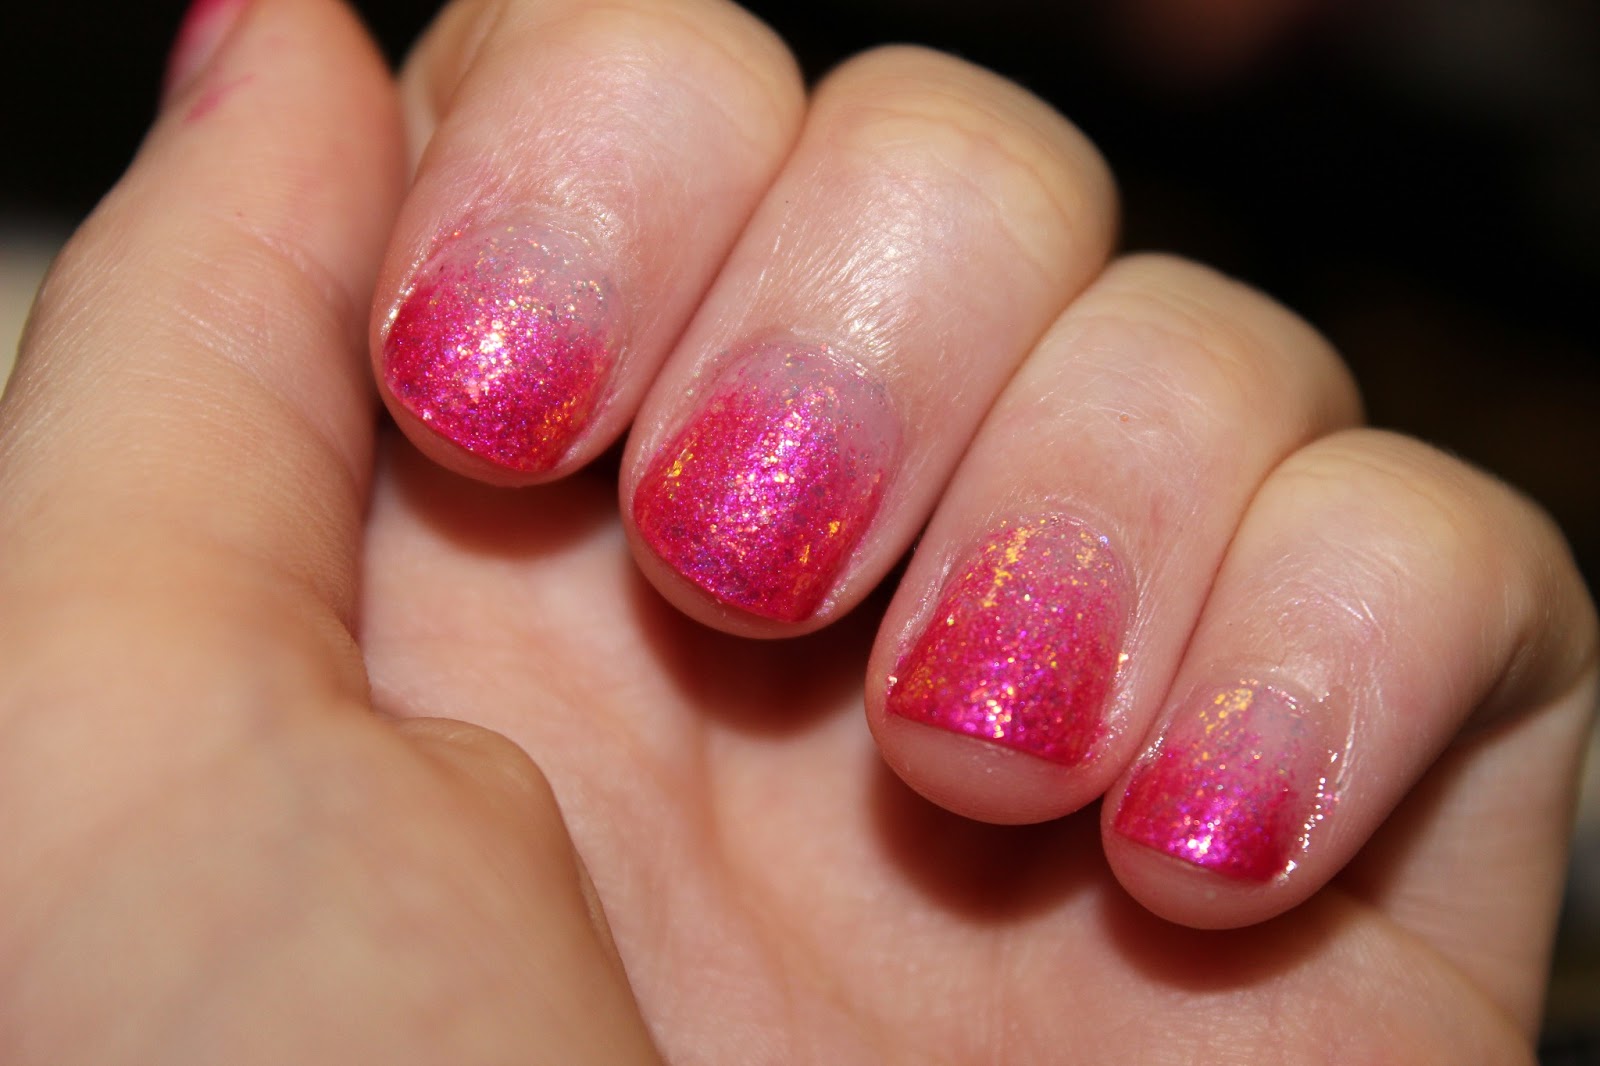 Luhivy's favorite things: Easy Nail Art : Ombré Nails